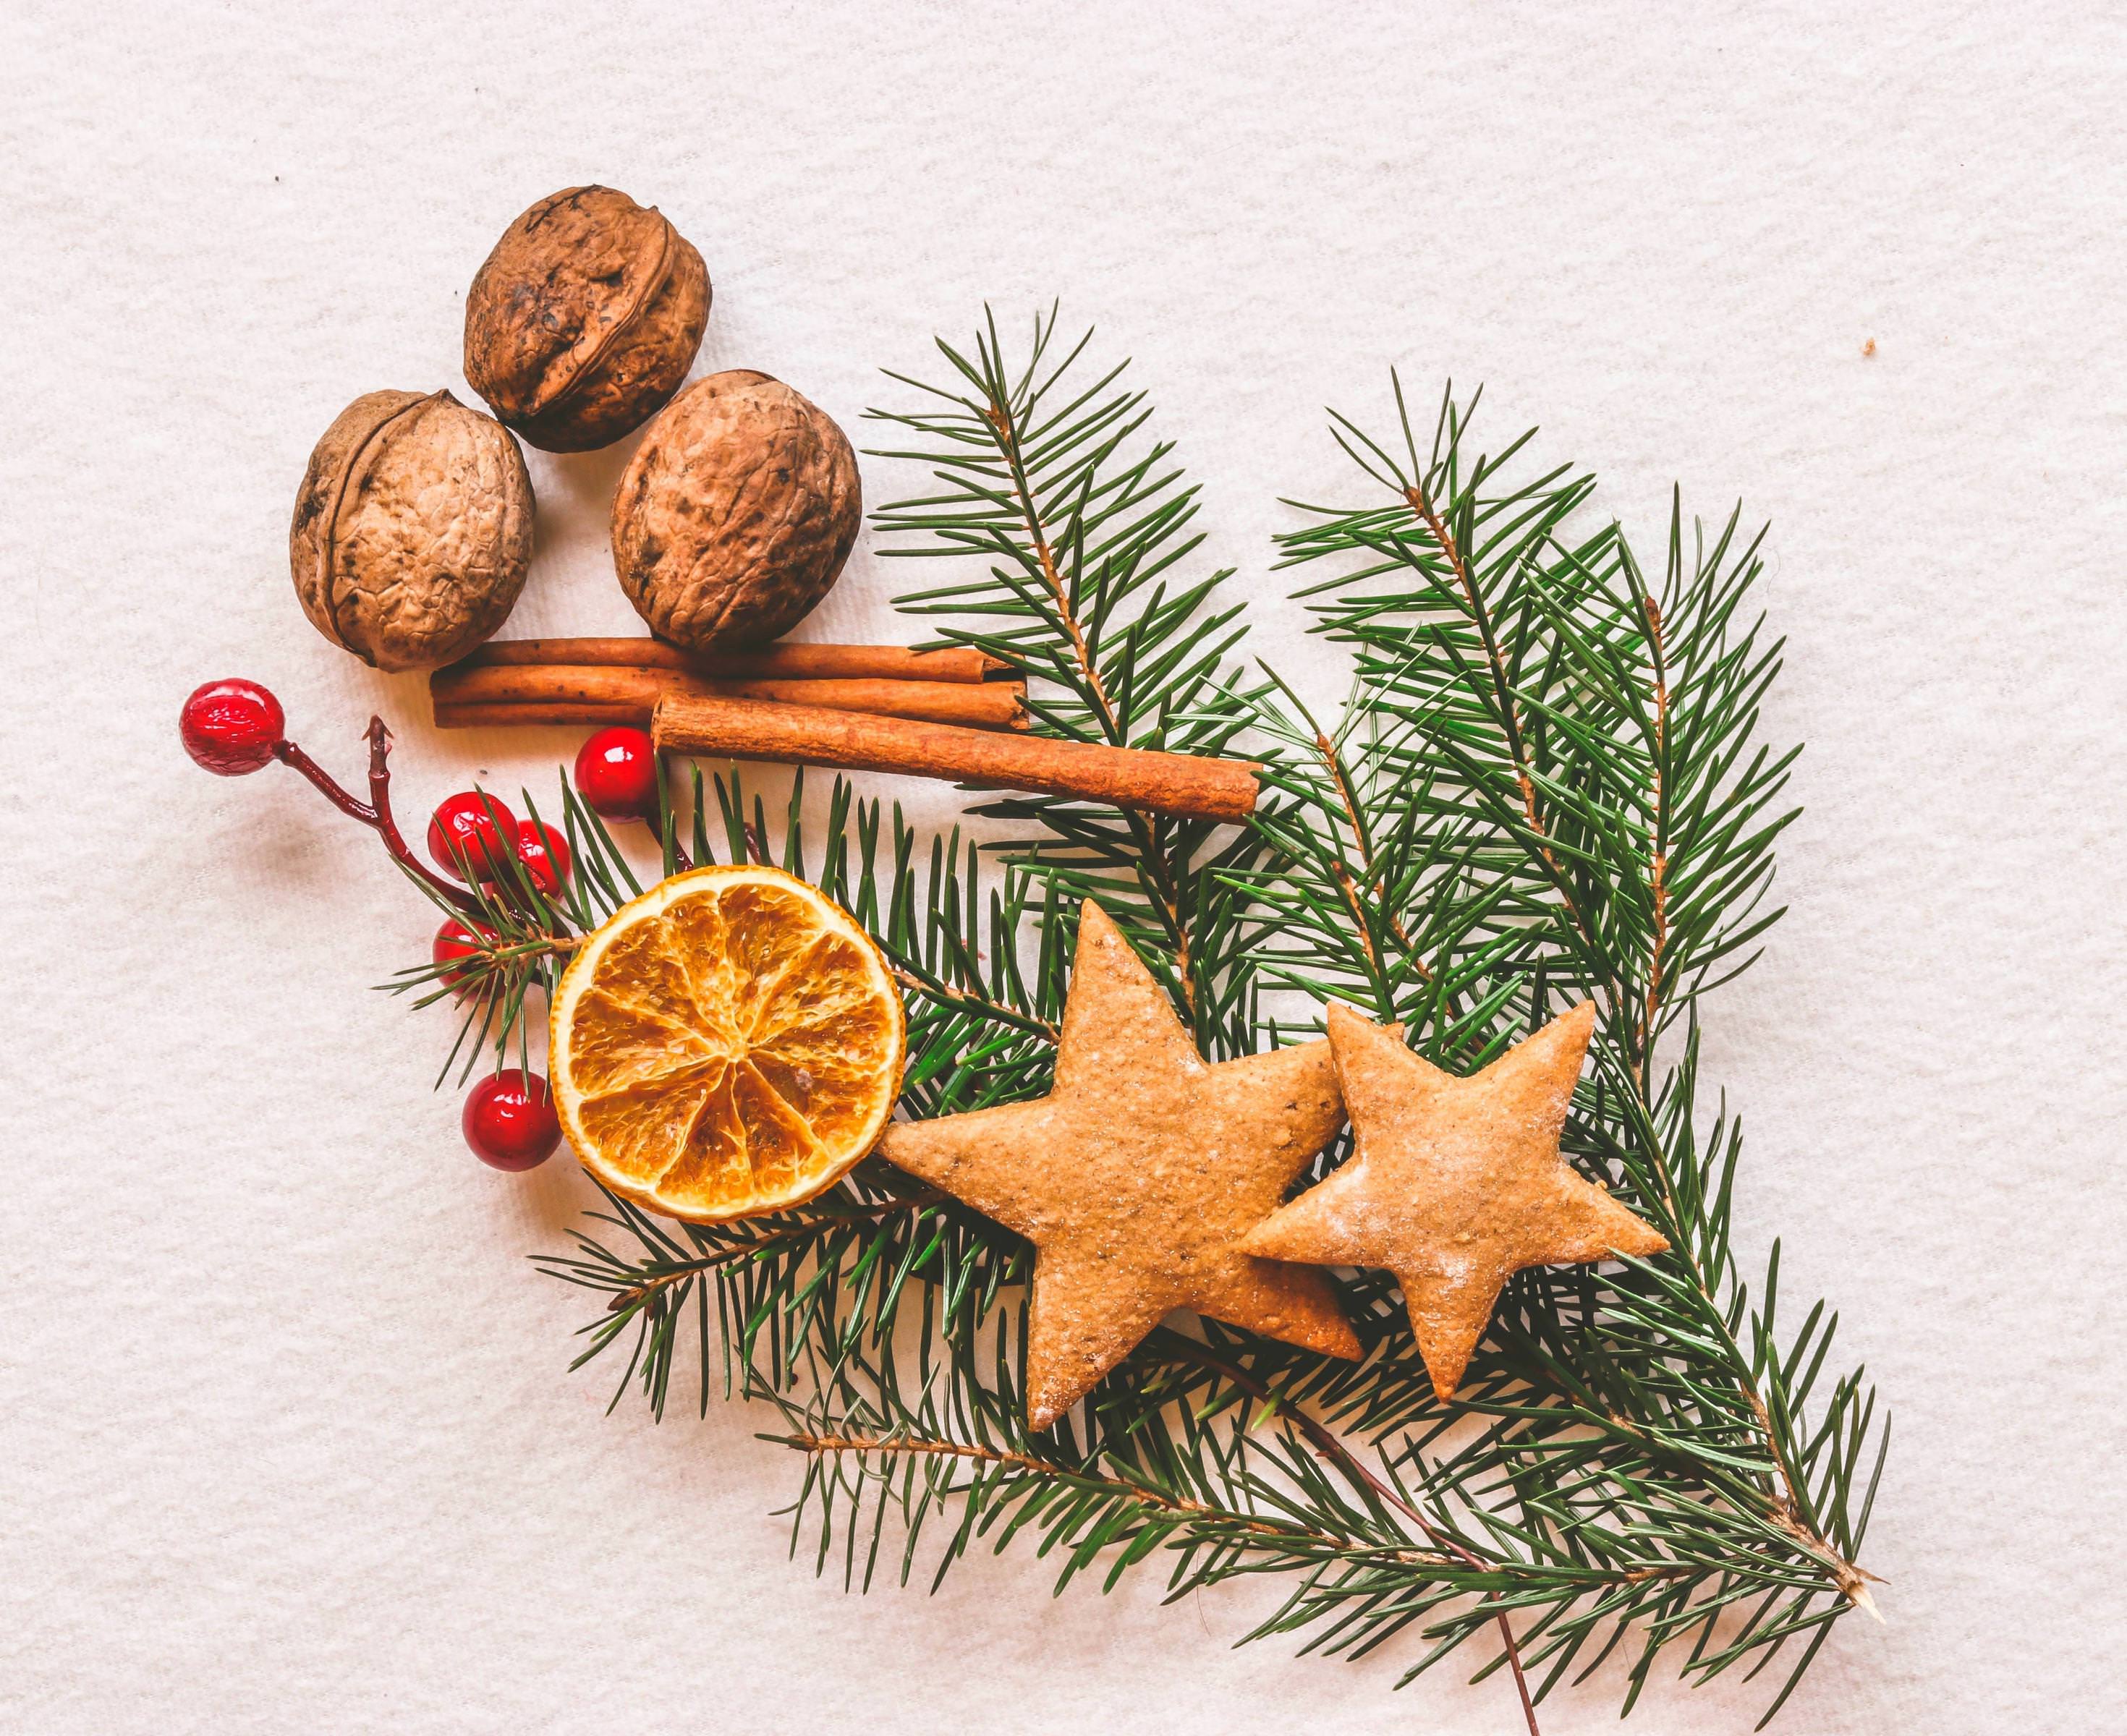 This photo of pine needles, cinnamon sticks, and other festive decorations makes for a great social media share in fall.